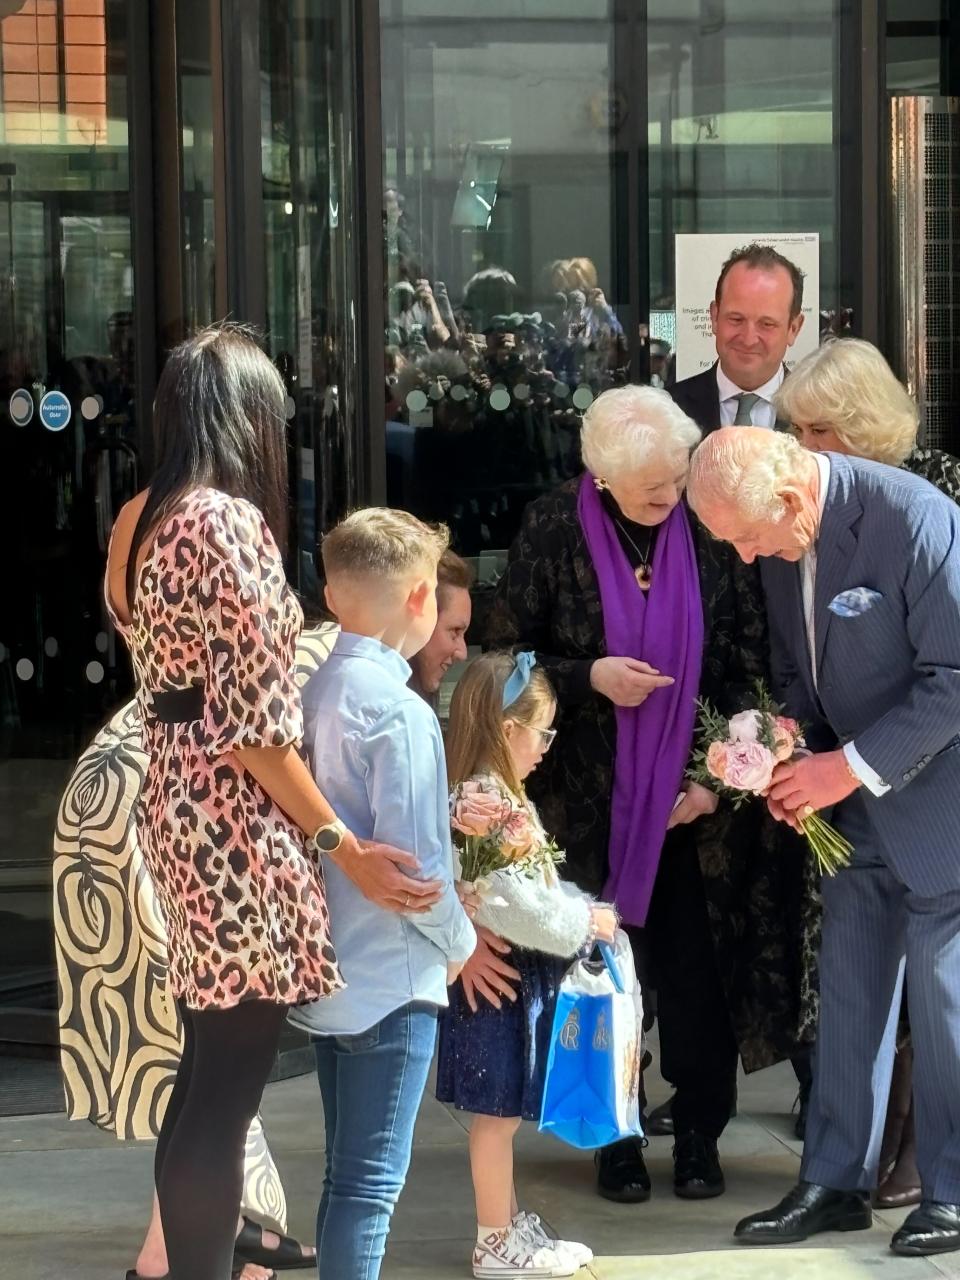 The King and Queen greeted the children who had waited to say goodbye to them (The Independent)